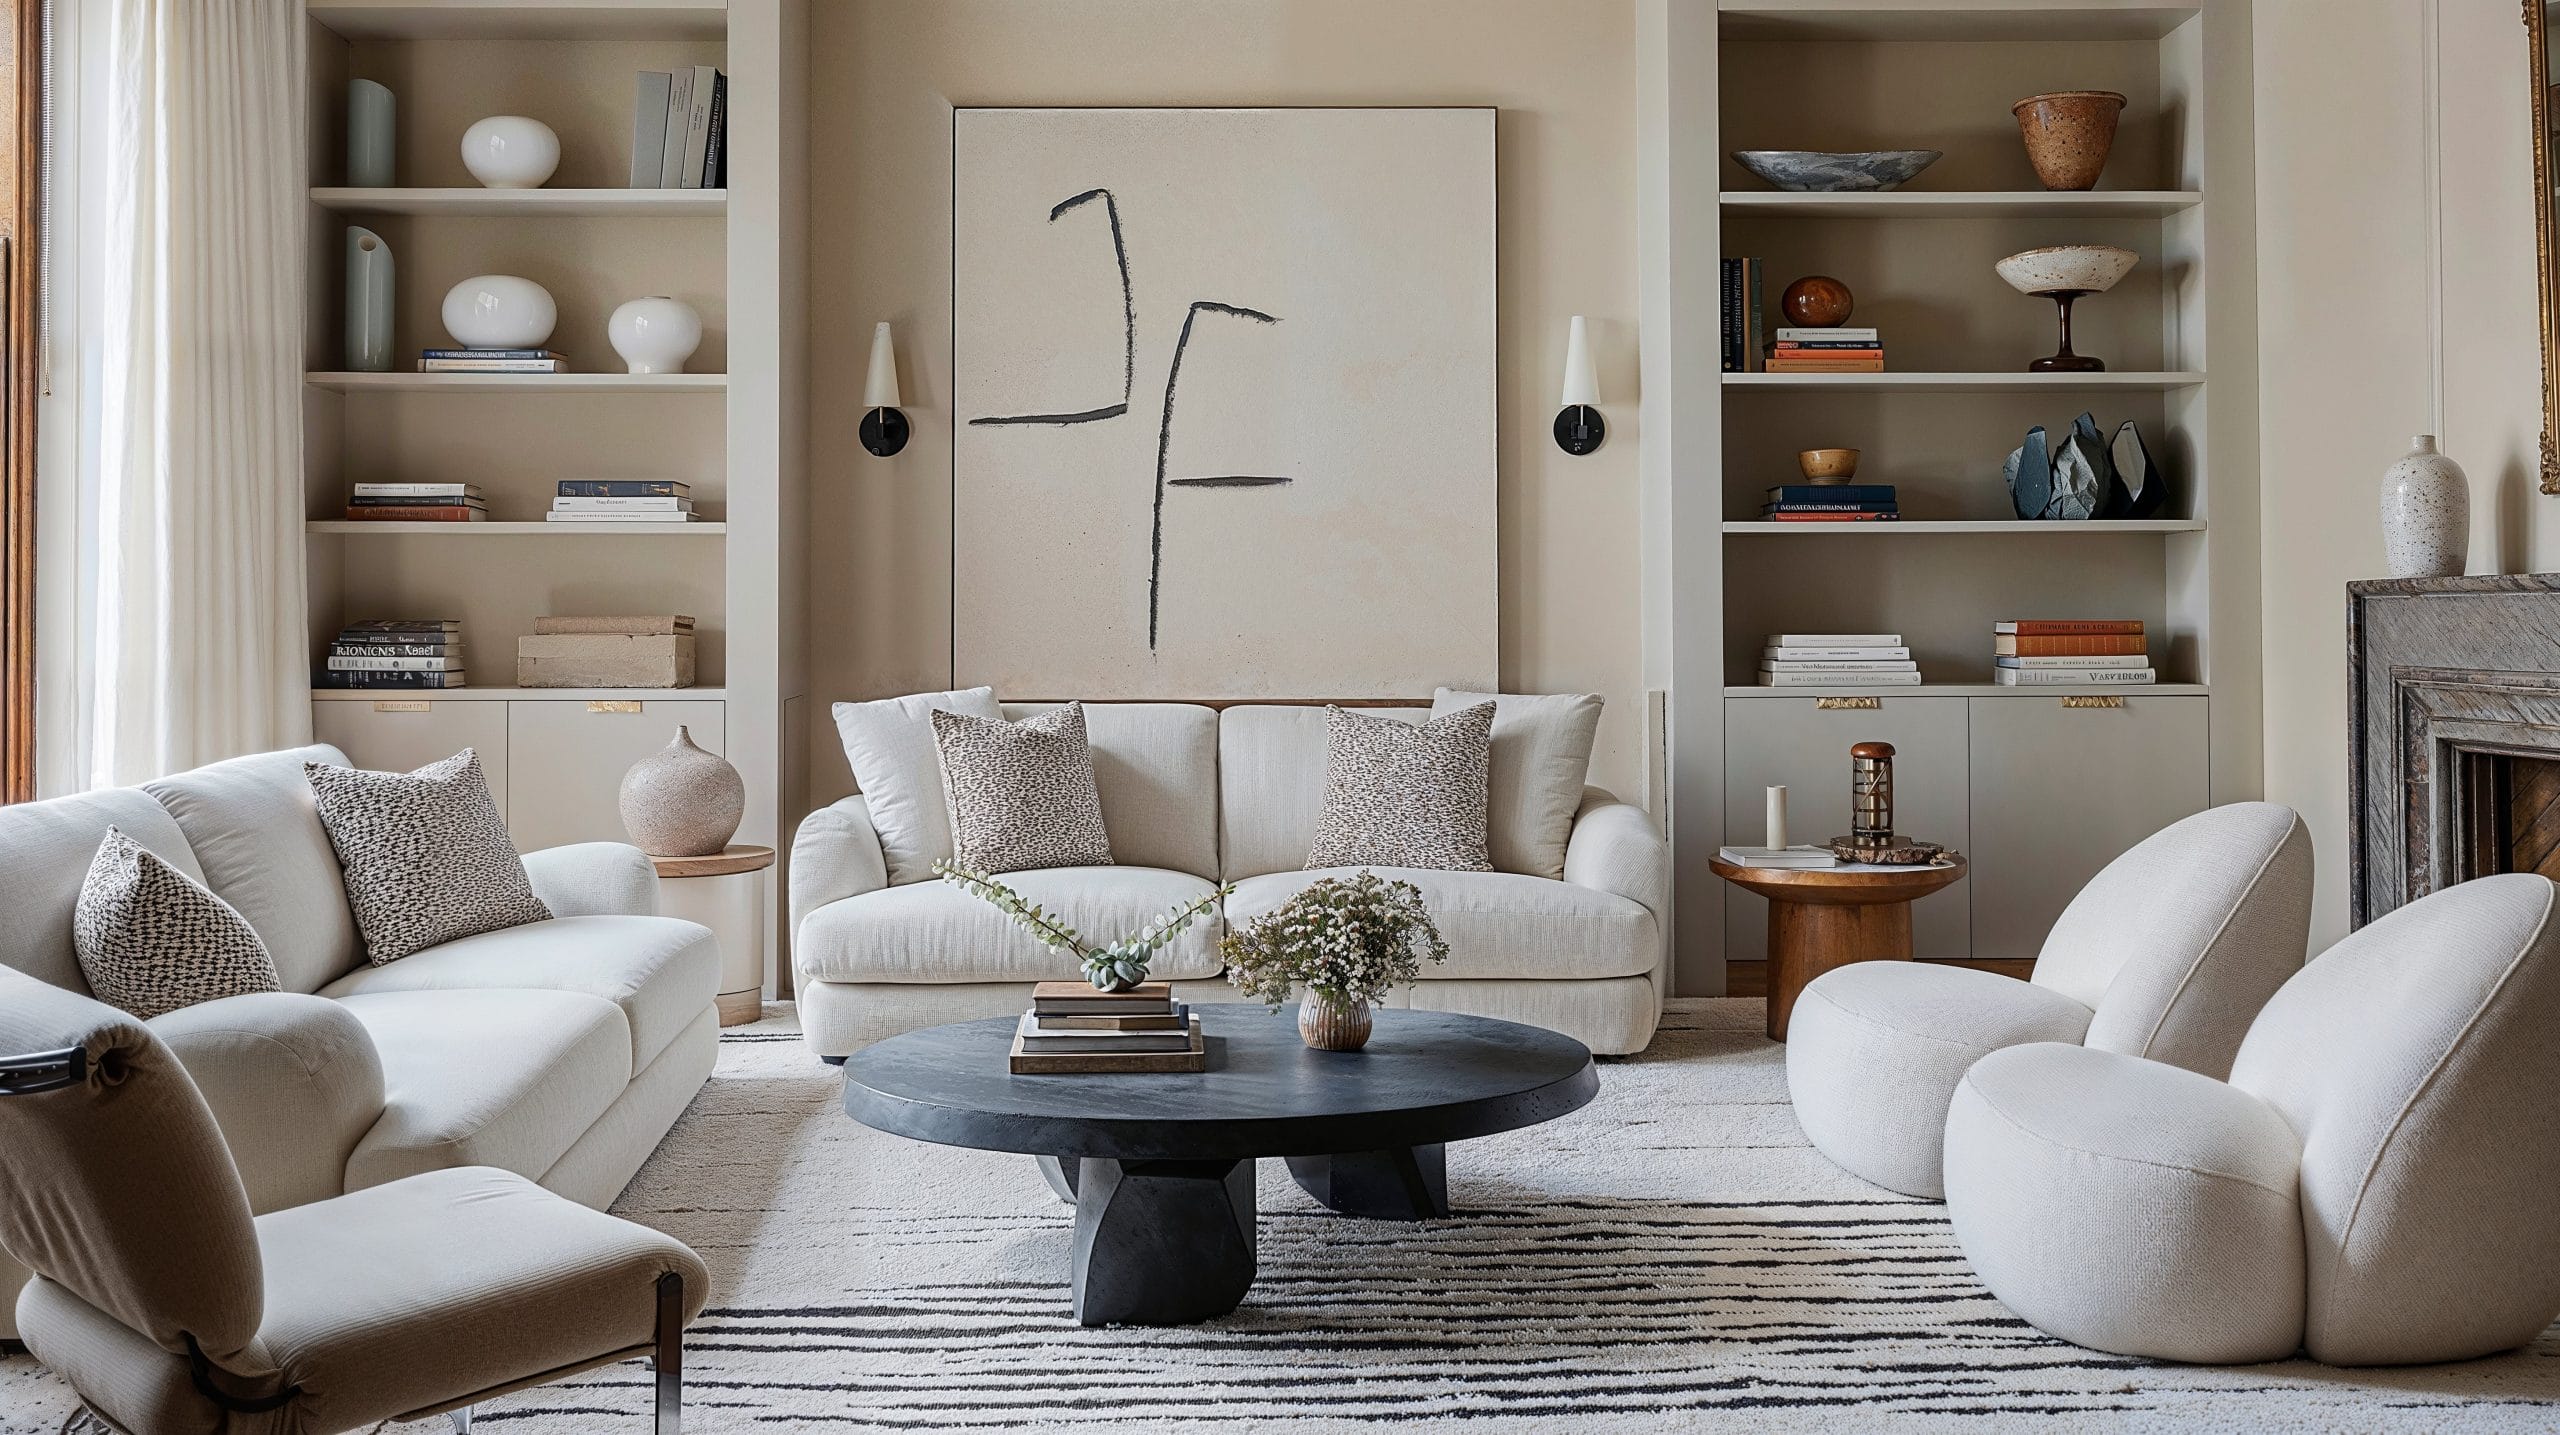 10 White Living Room Ideas for a Bright, Inviting Space